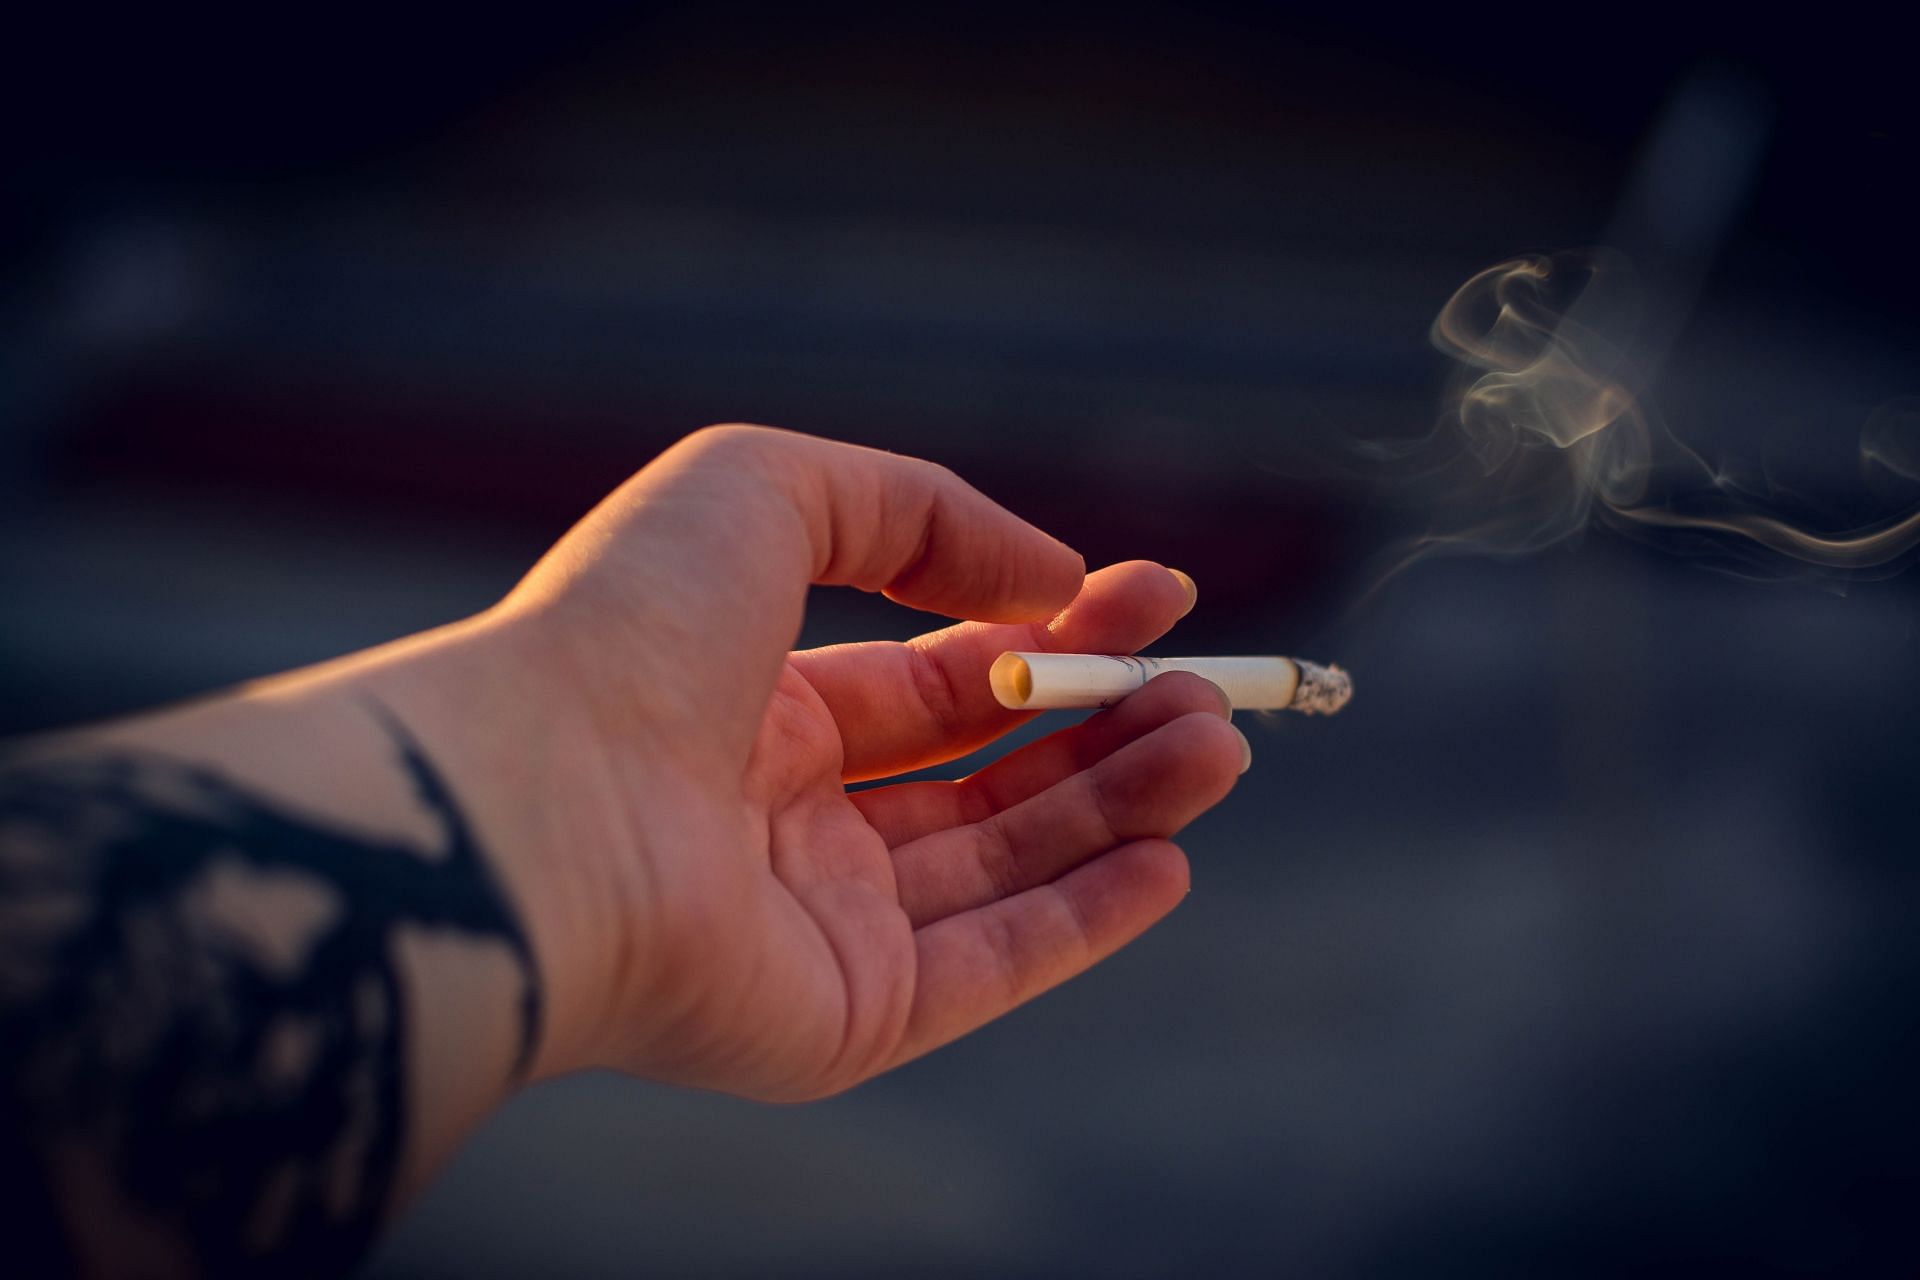 Smoking can contribute to the development of this eye condition (Image source/ Pexels)